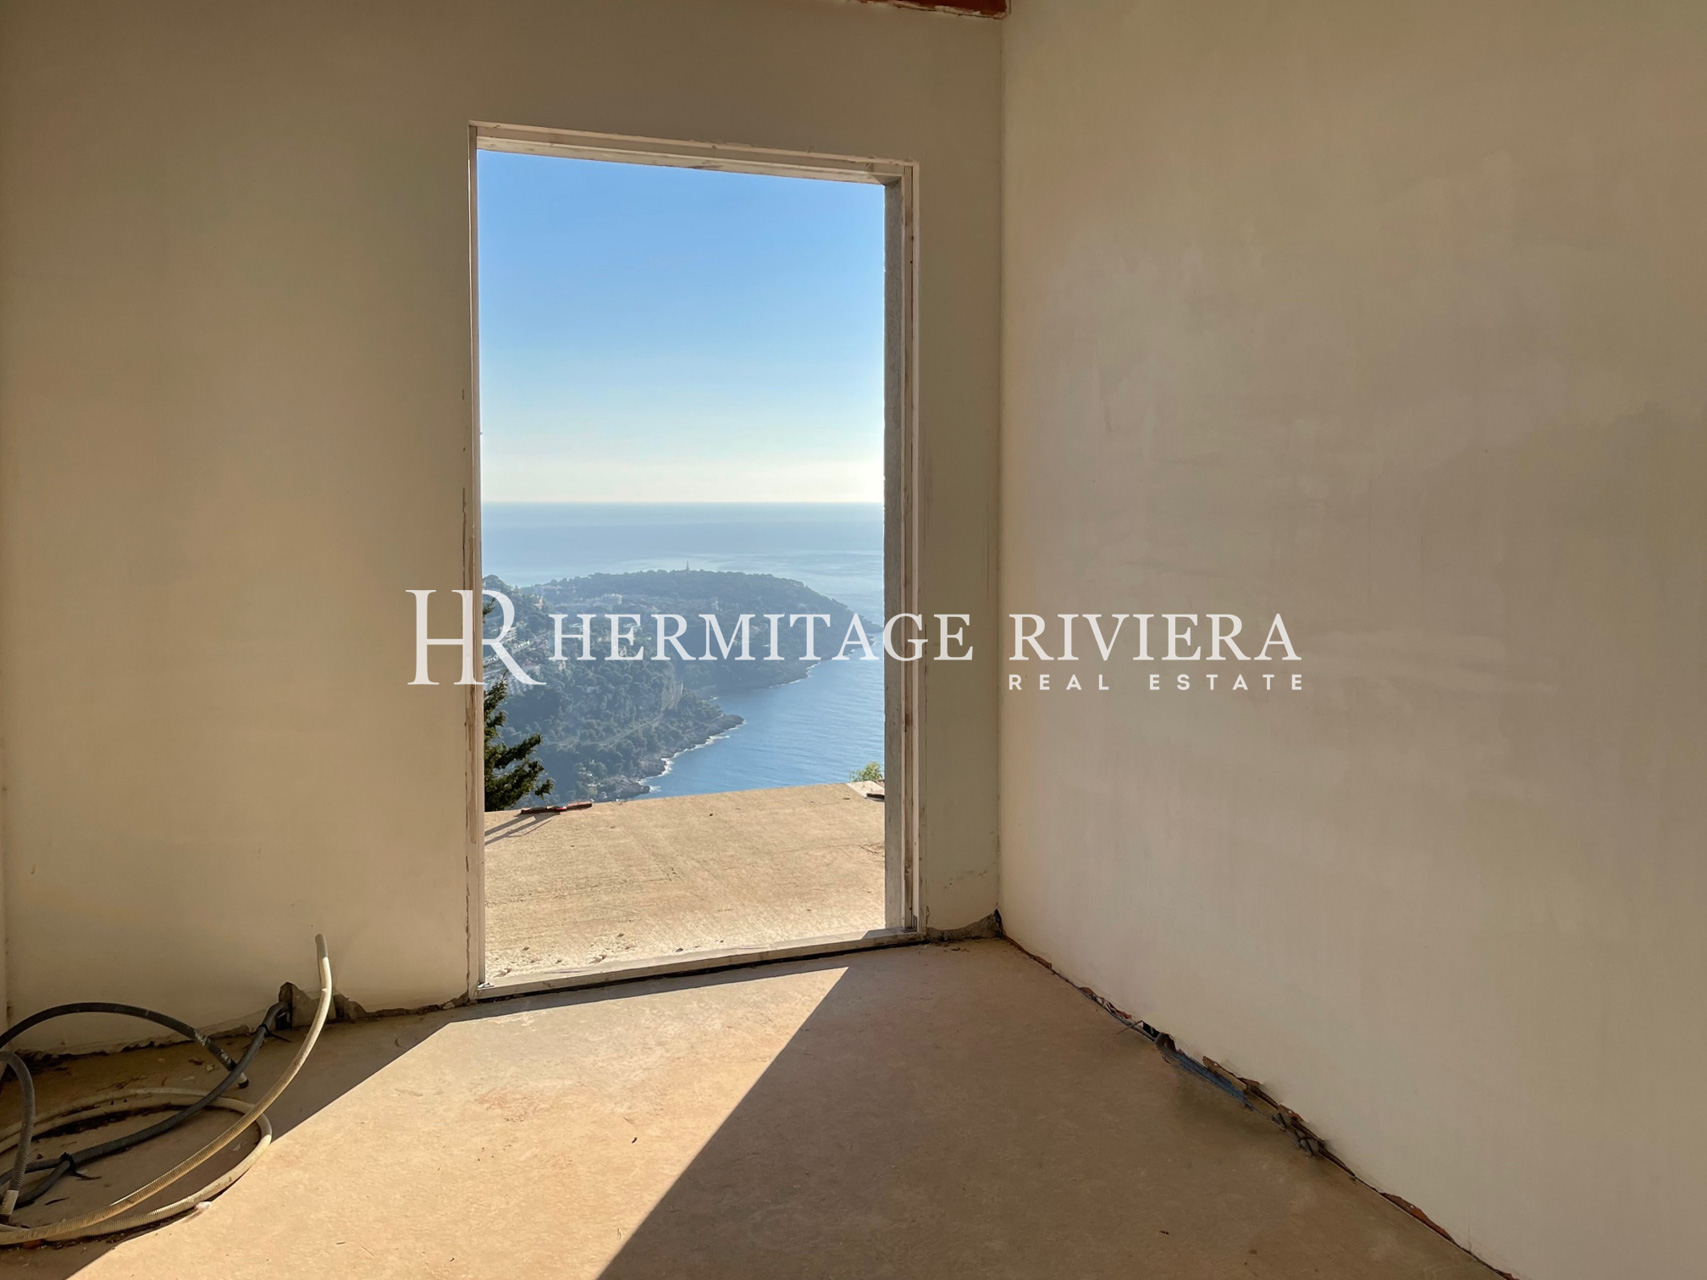 Property close Monaco with panoramic view  (image 13)